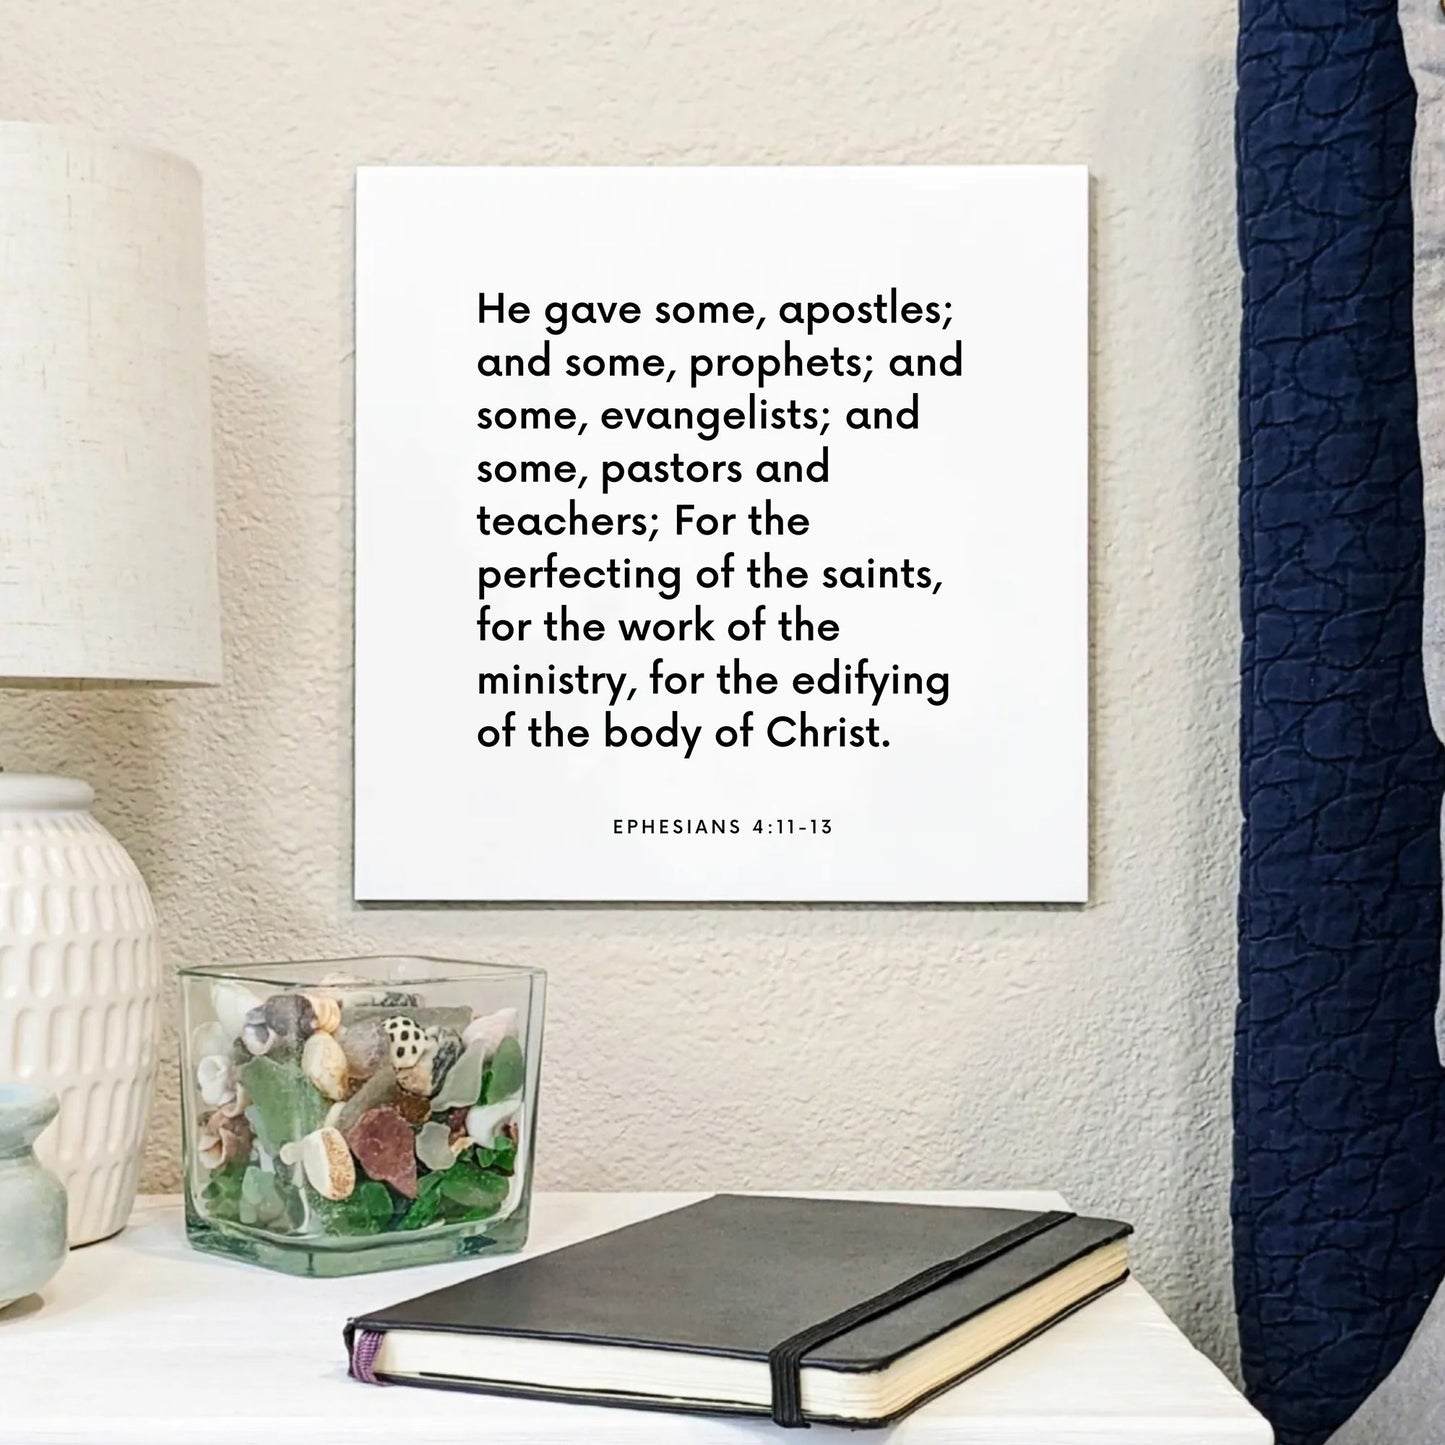 Bedside mouting of the scripture tile for Ephesians 4:11-13 - "He gave some, apostles; and some, prophets"